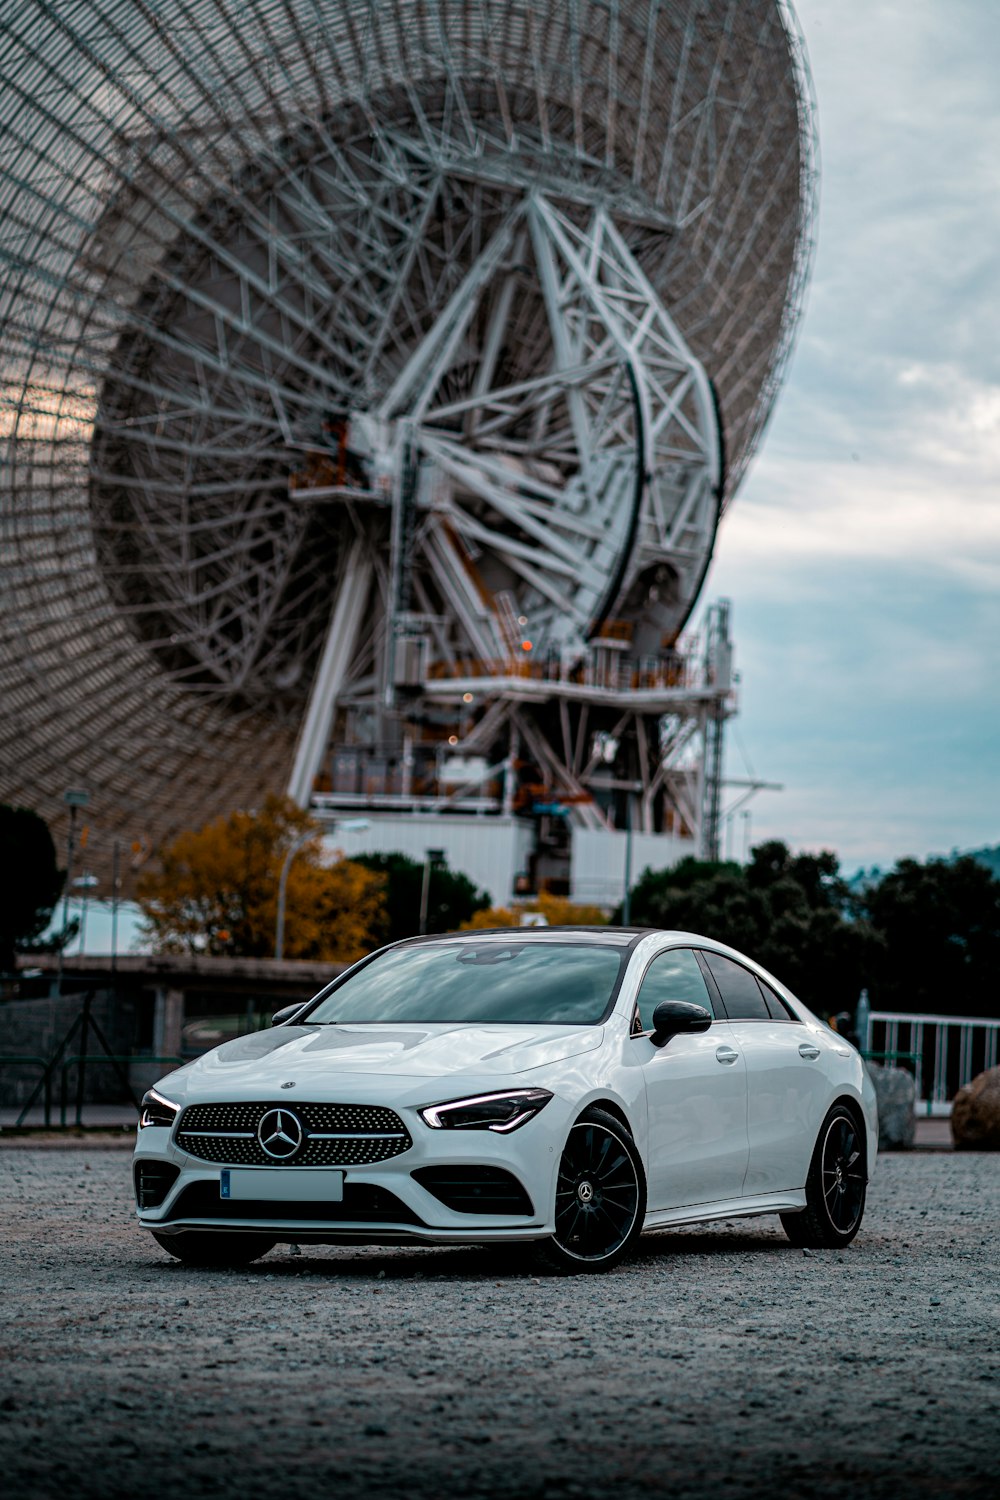 white mercedes benz coupe parked near ferris wheel during daytime